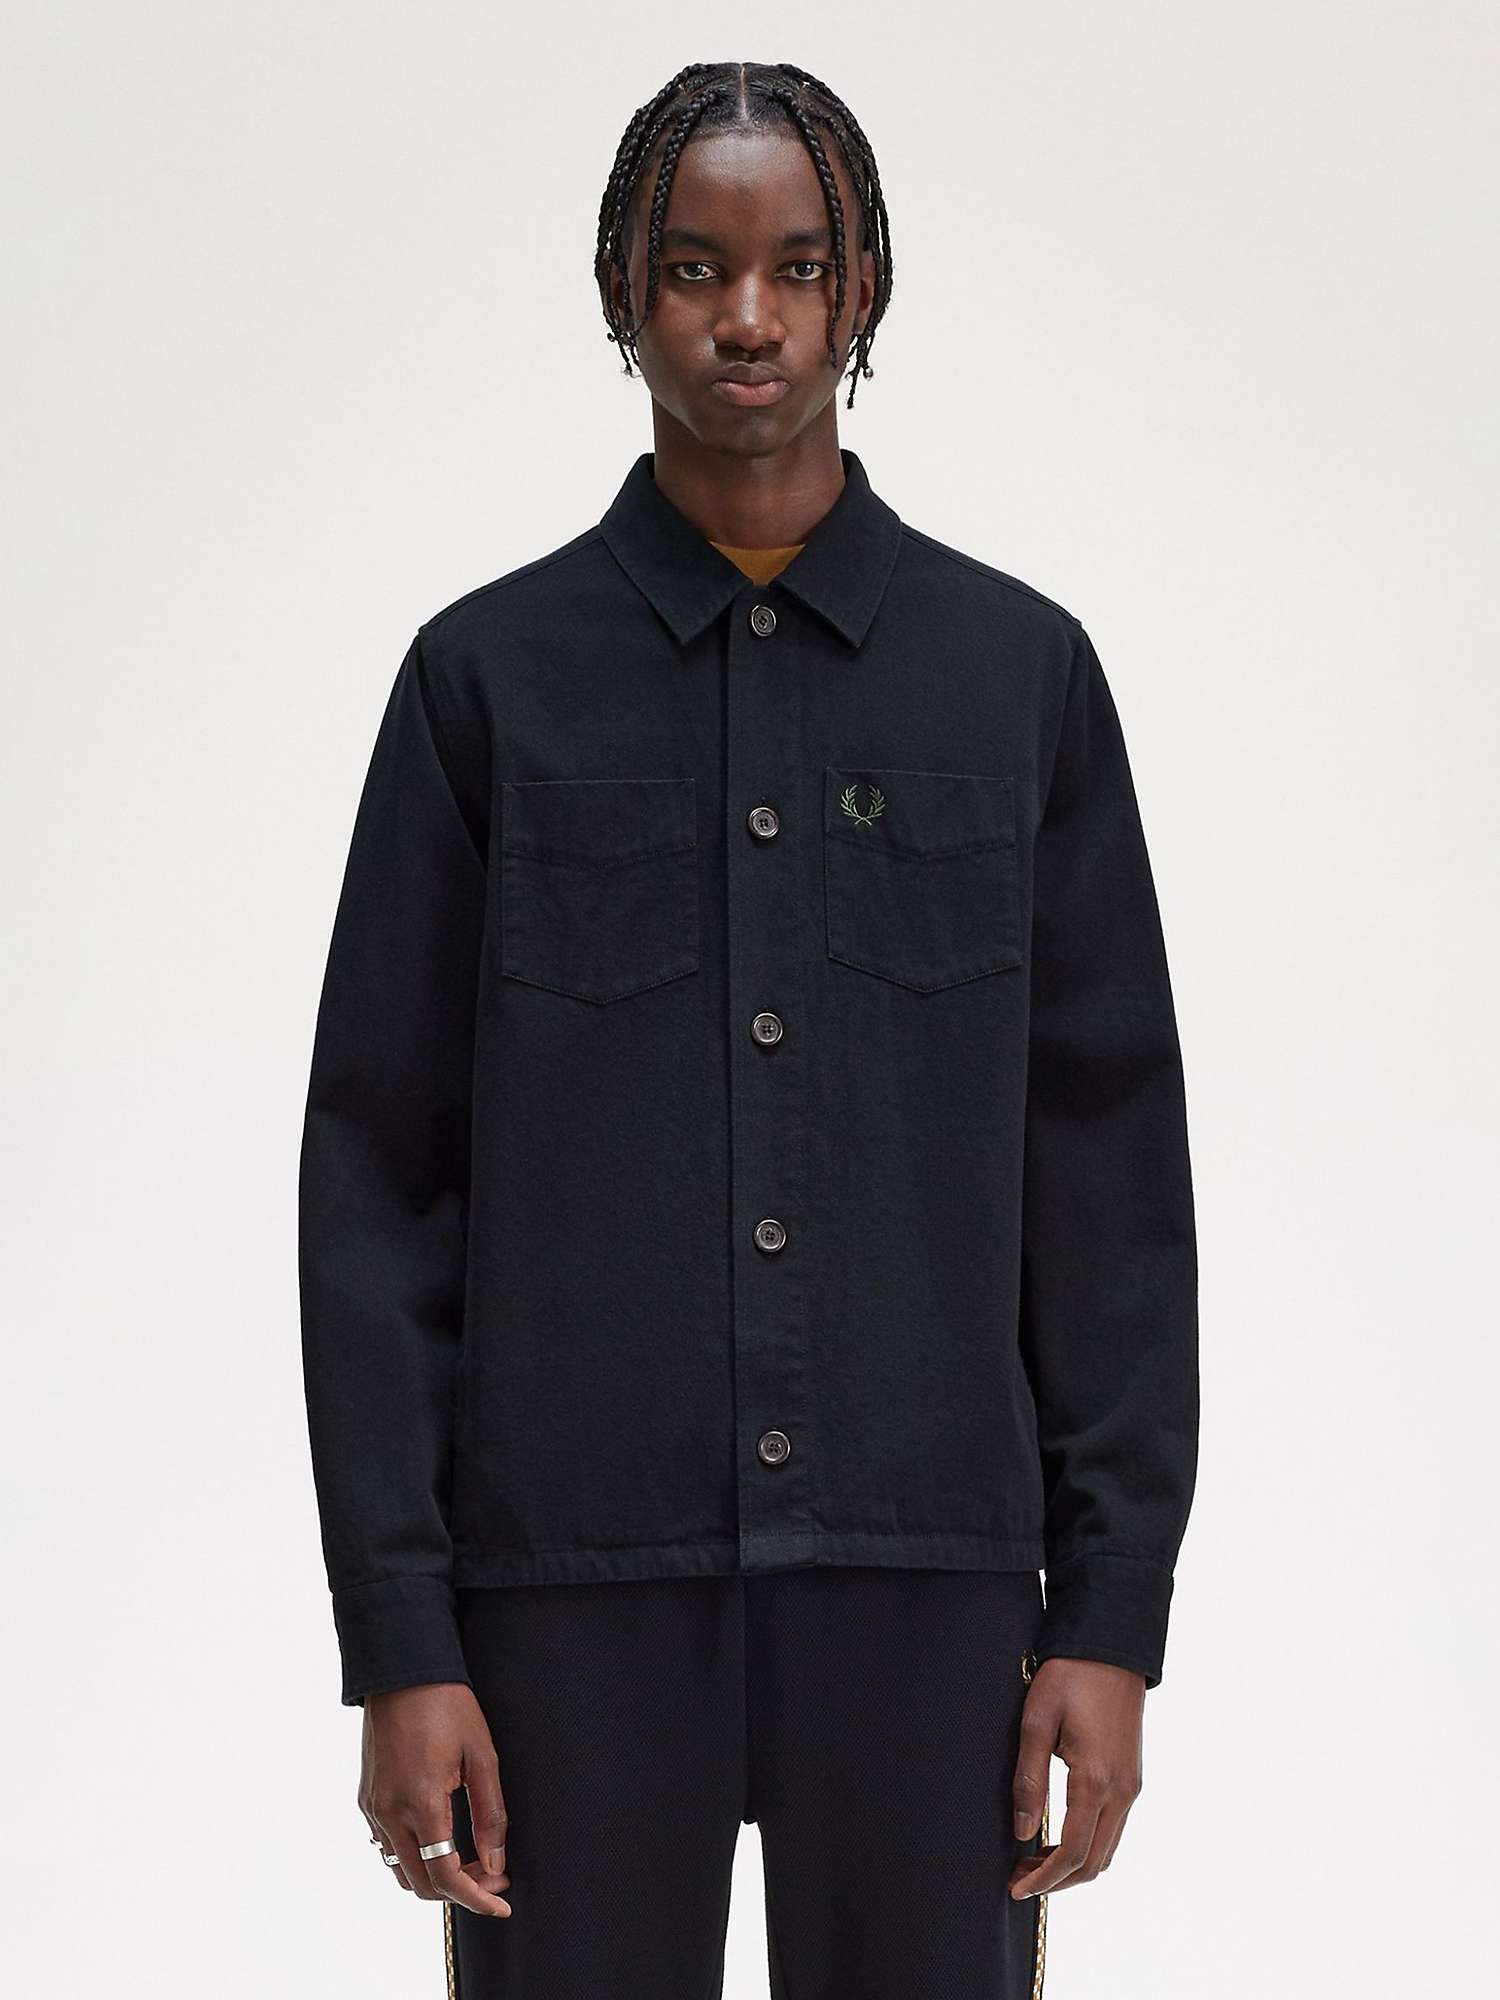 Fred Perry Twill Overshirt, Black at John Lewis & Partners